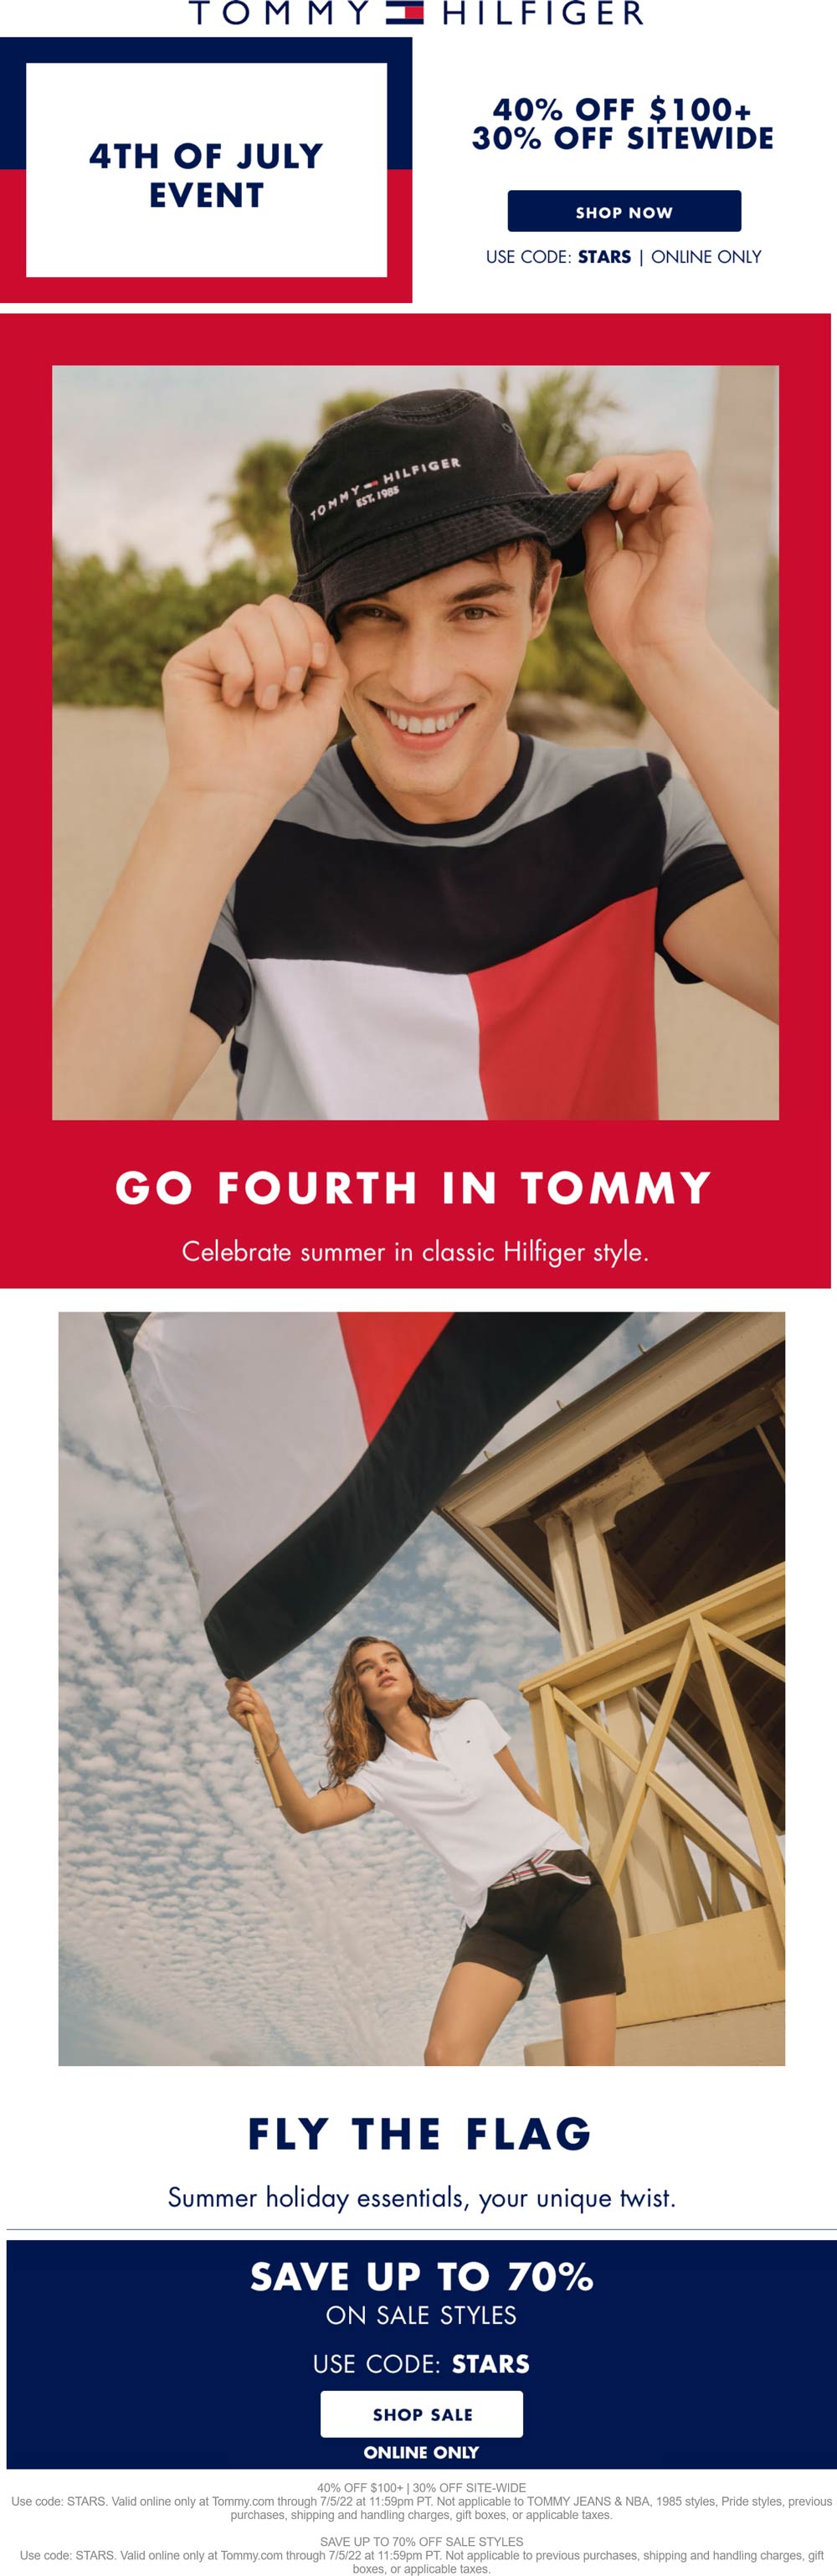 Tommy Hilfiger stores Coupon  30-40% off online at Tommy Hilfiger via promo code STARS #tommyhilfiger 